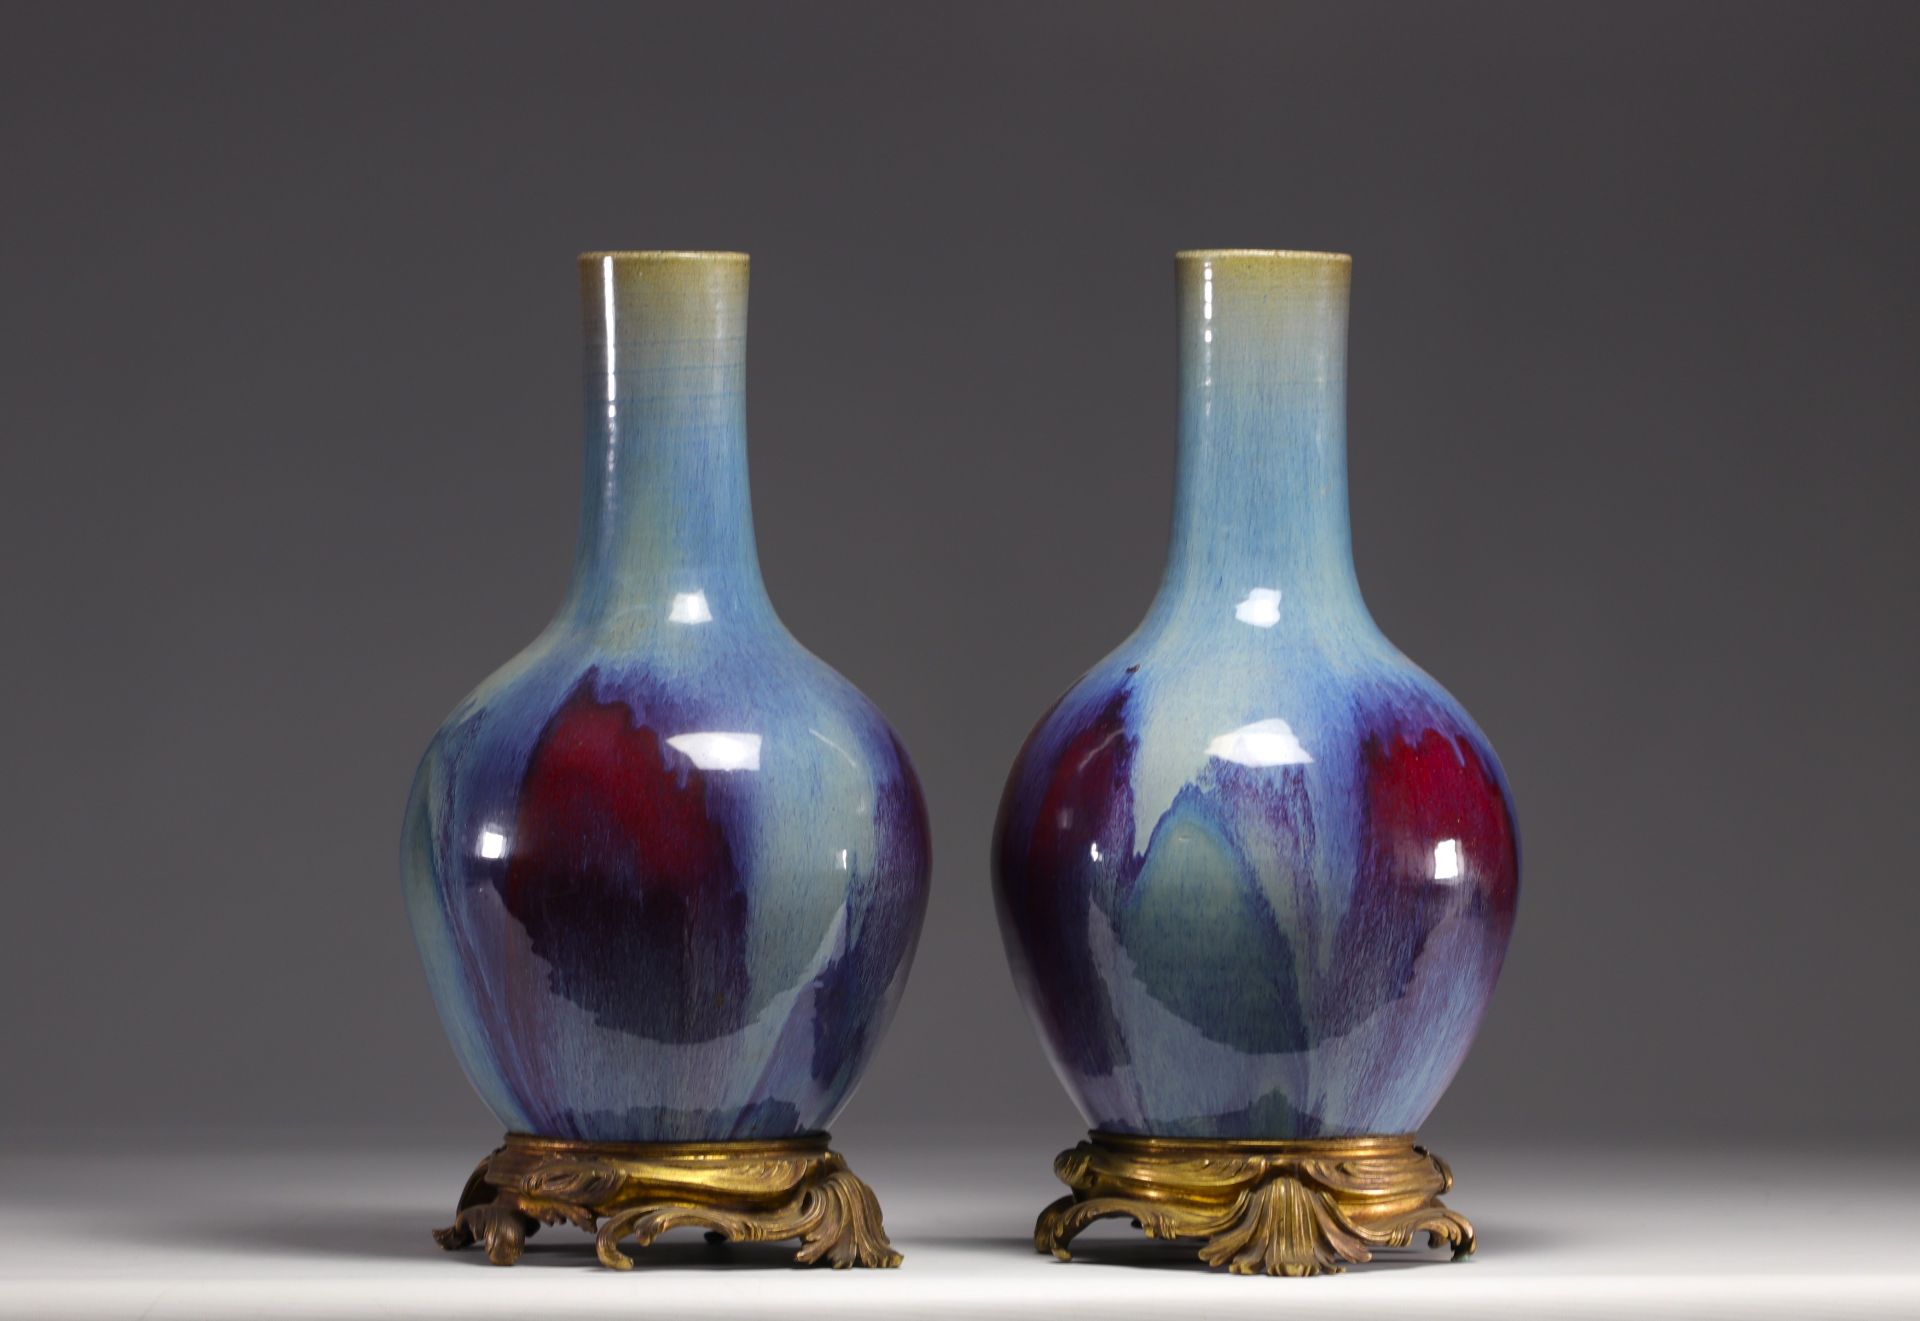 Rare pair of porcelain vases with flamed glaze mounted on bronze from 18th century - Bild 2 aus 5